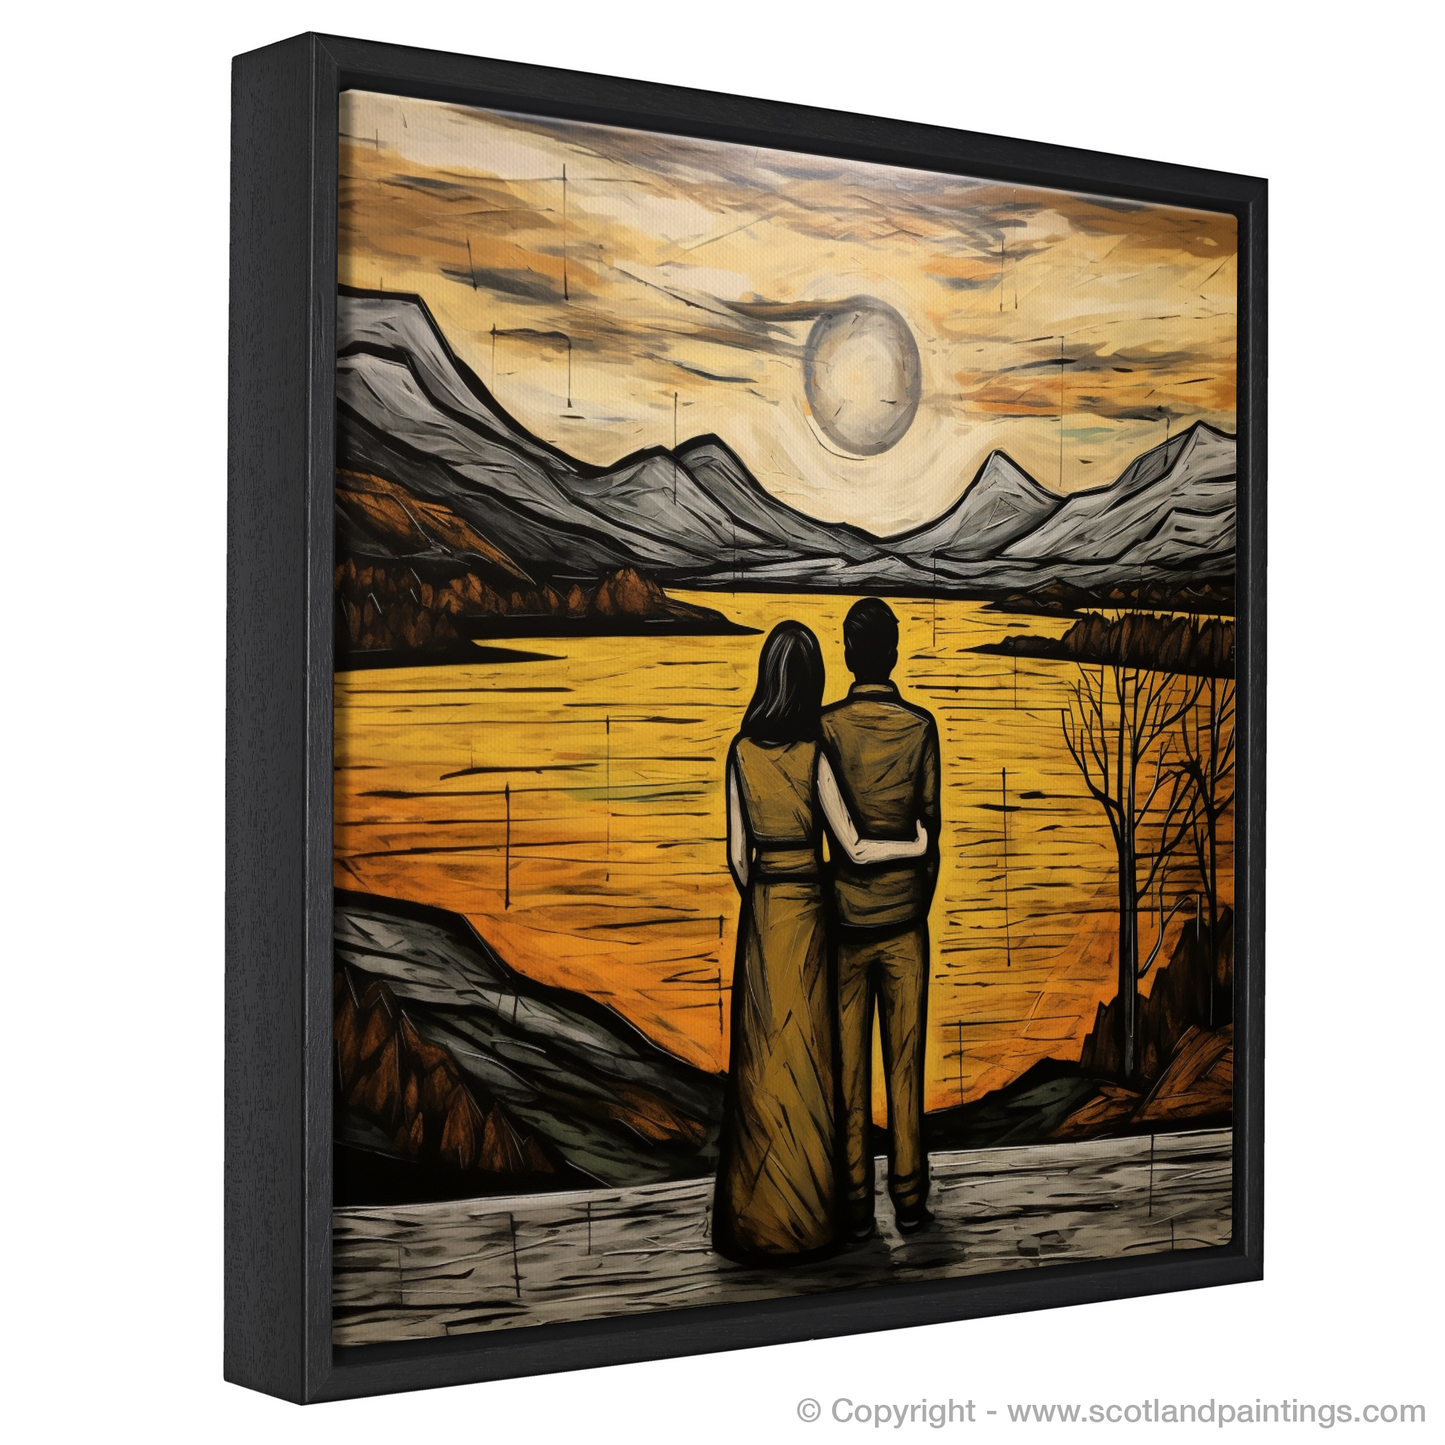 Painting and Art Print of A couple holding hands looking out on Loch Lomond entitled "Embrace at Loch Lomond: An Illustrative Expression of Love and Nature".